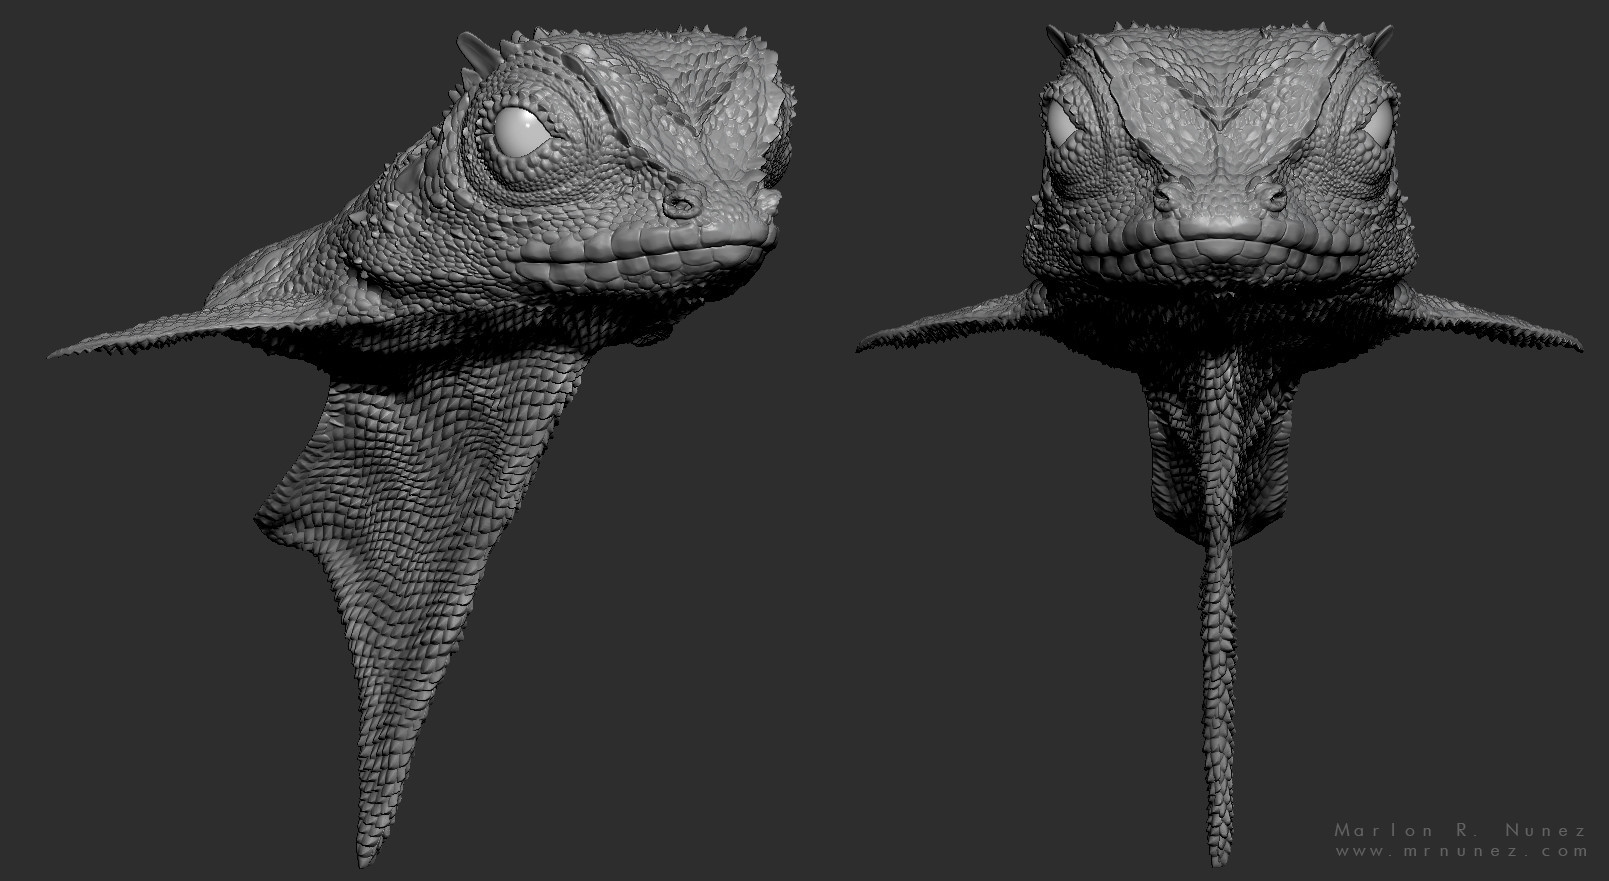 scale from zbrush is off